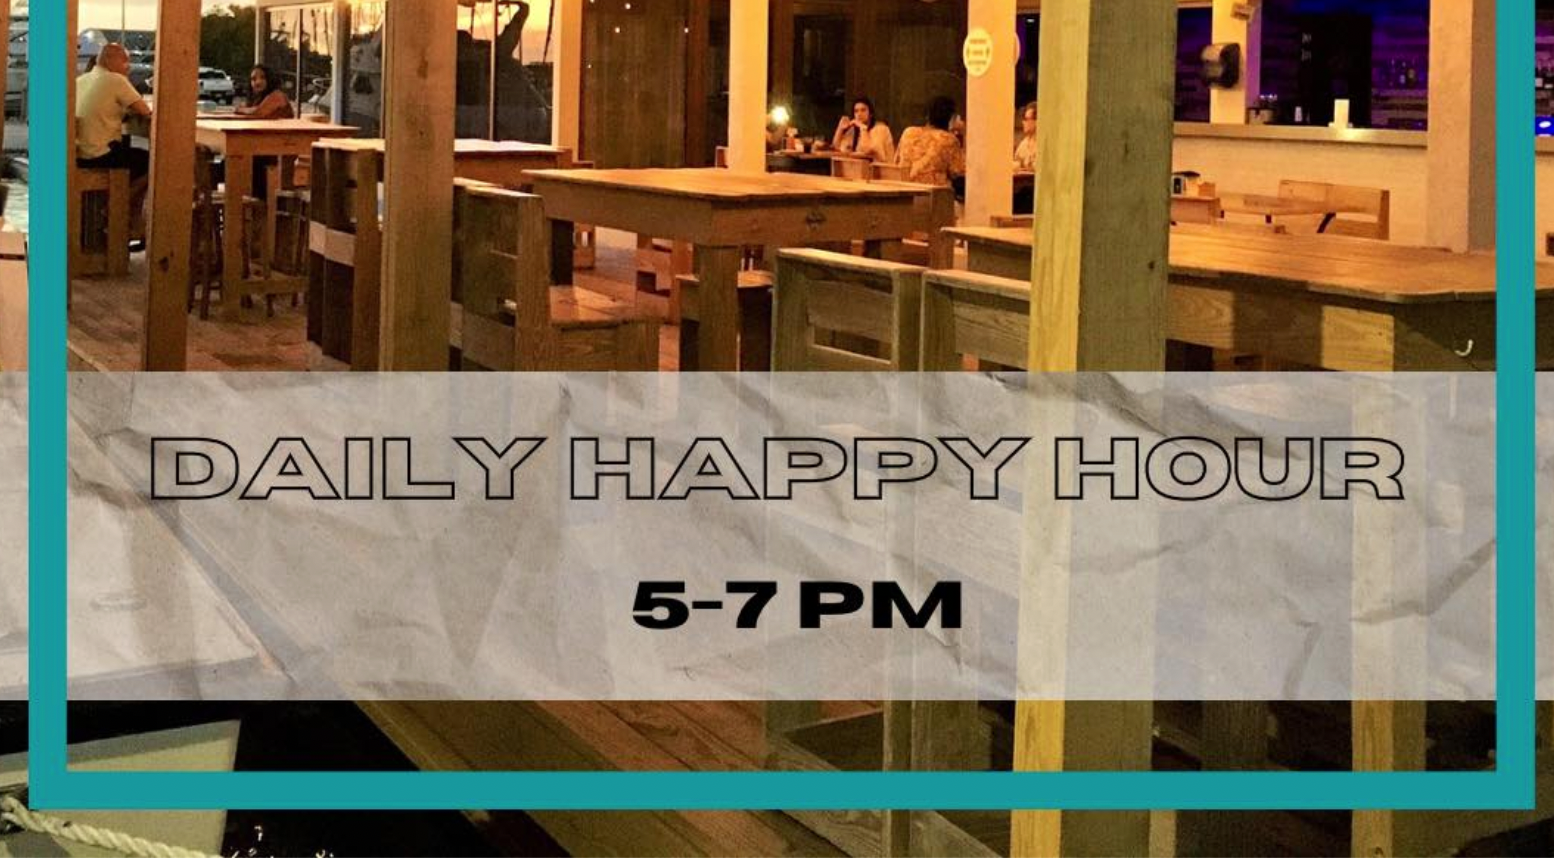 FISH HOUSE - HAPPY DAILY HOUR